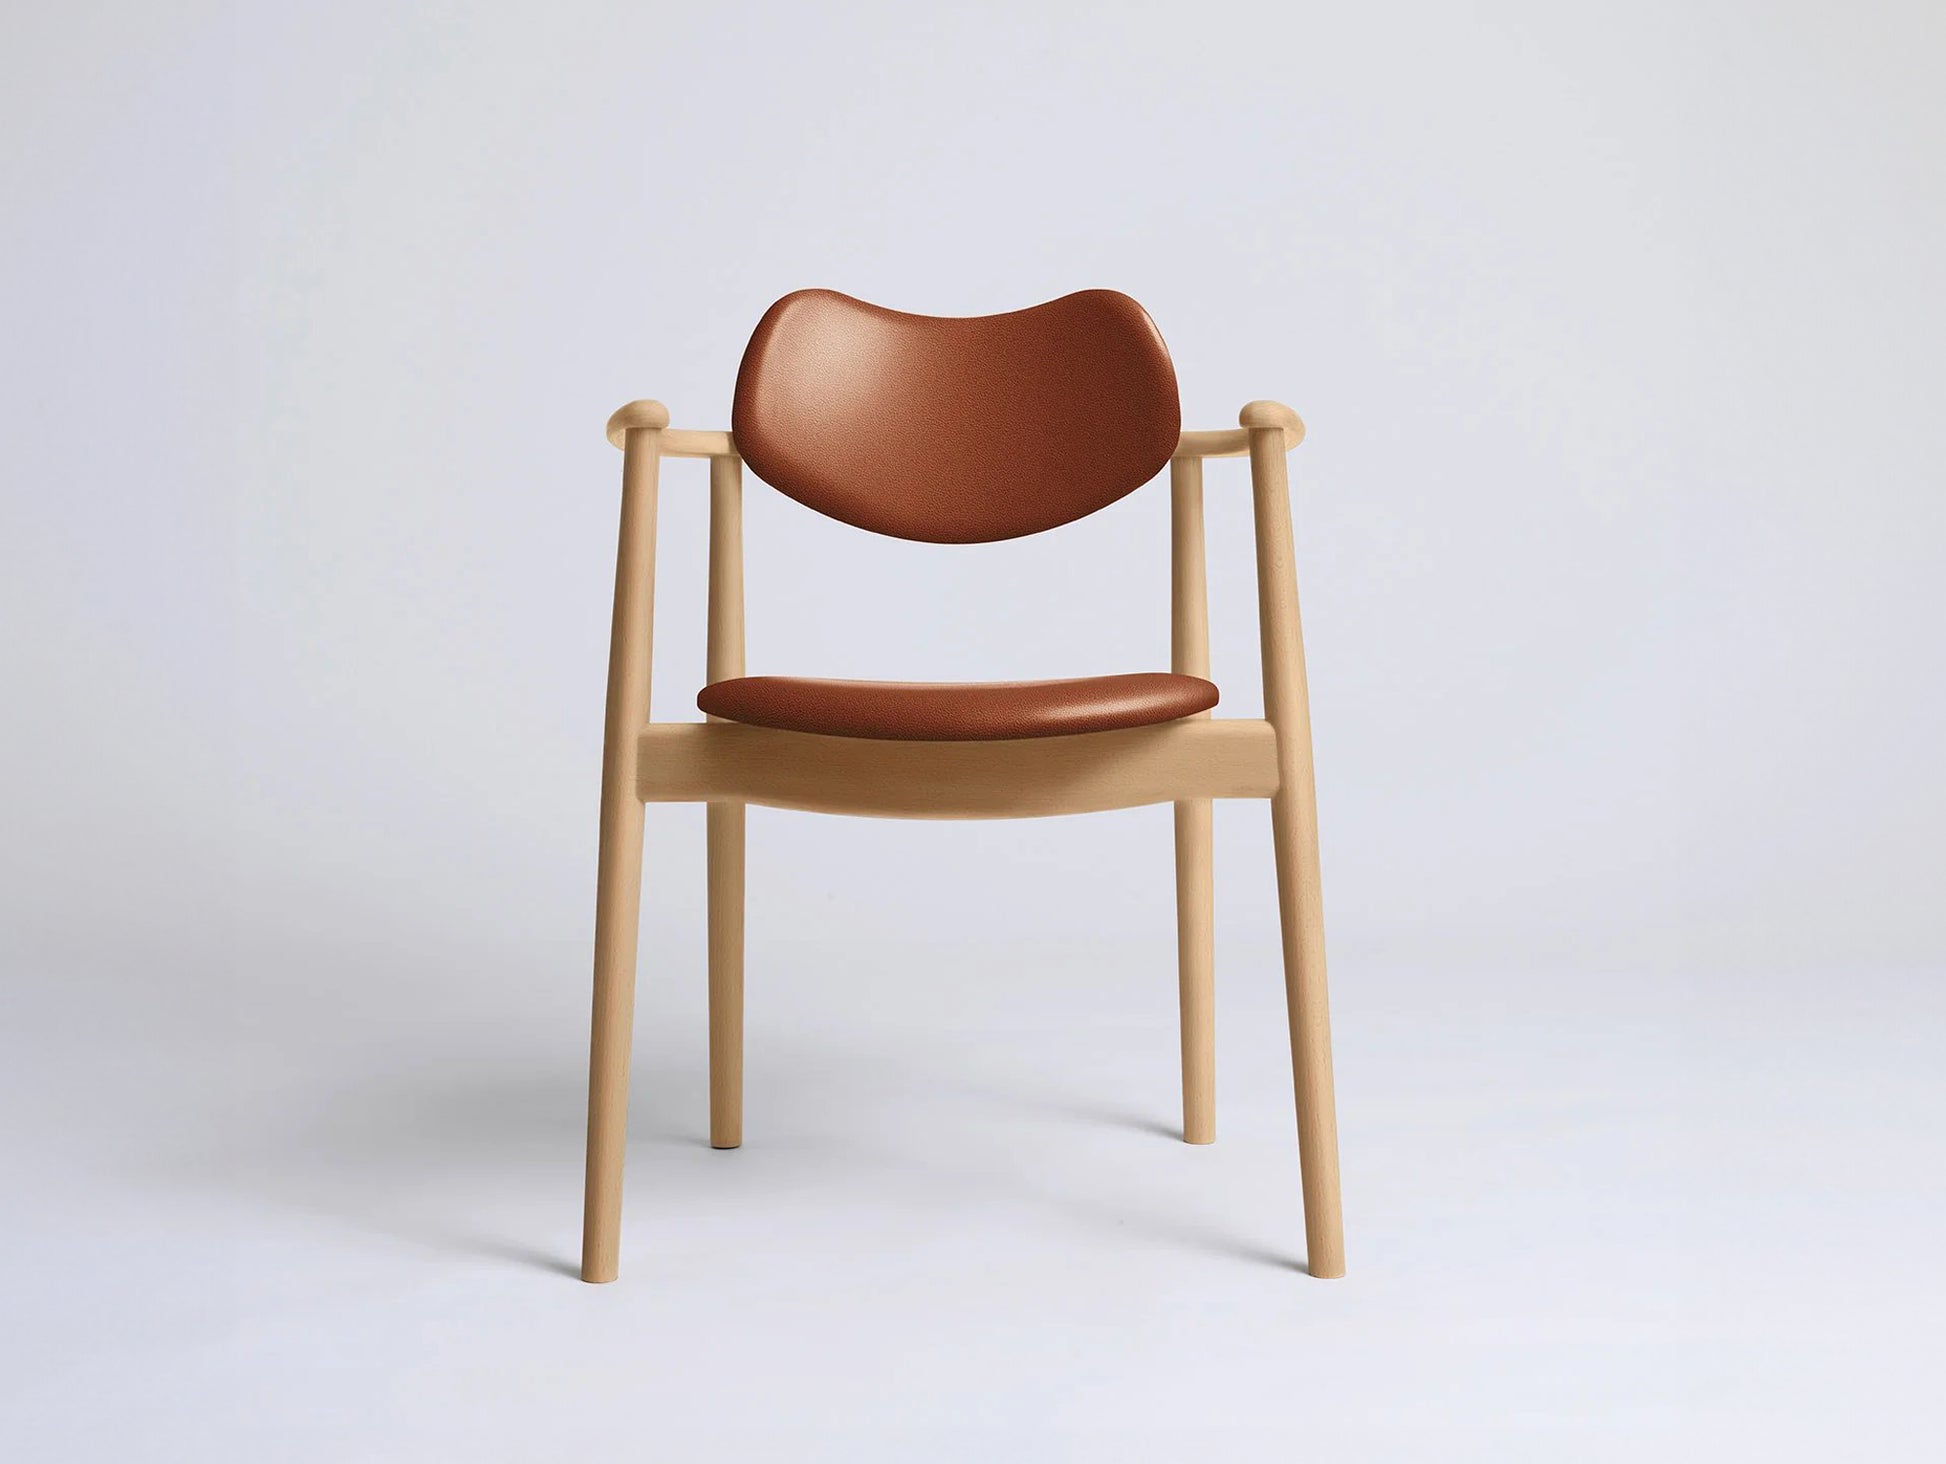 Regatta Chair Seat and Back Upholstered by Ro Collection - Oiled Beech / Standard Sierra Calvados Leather